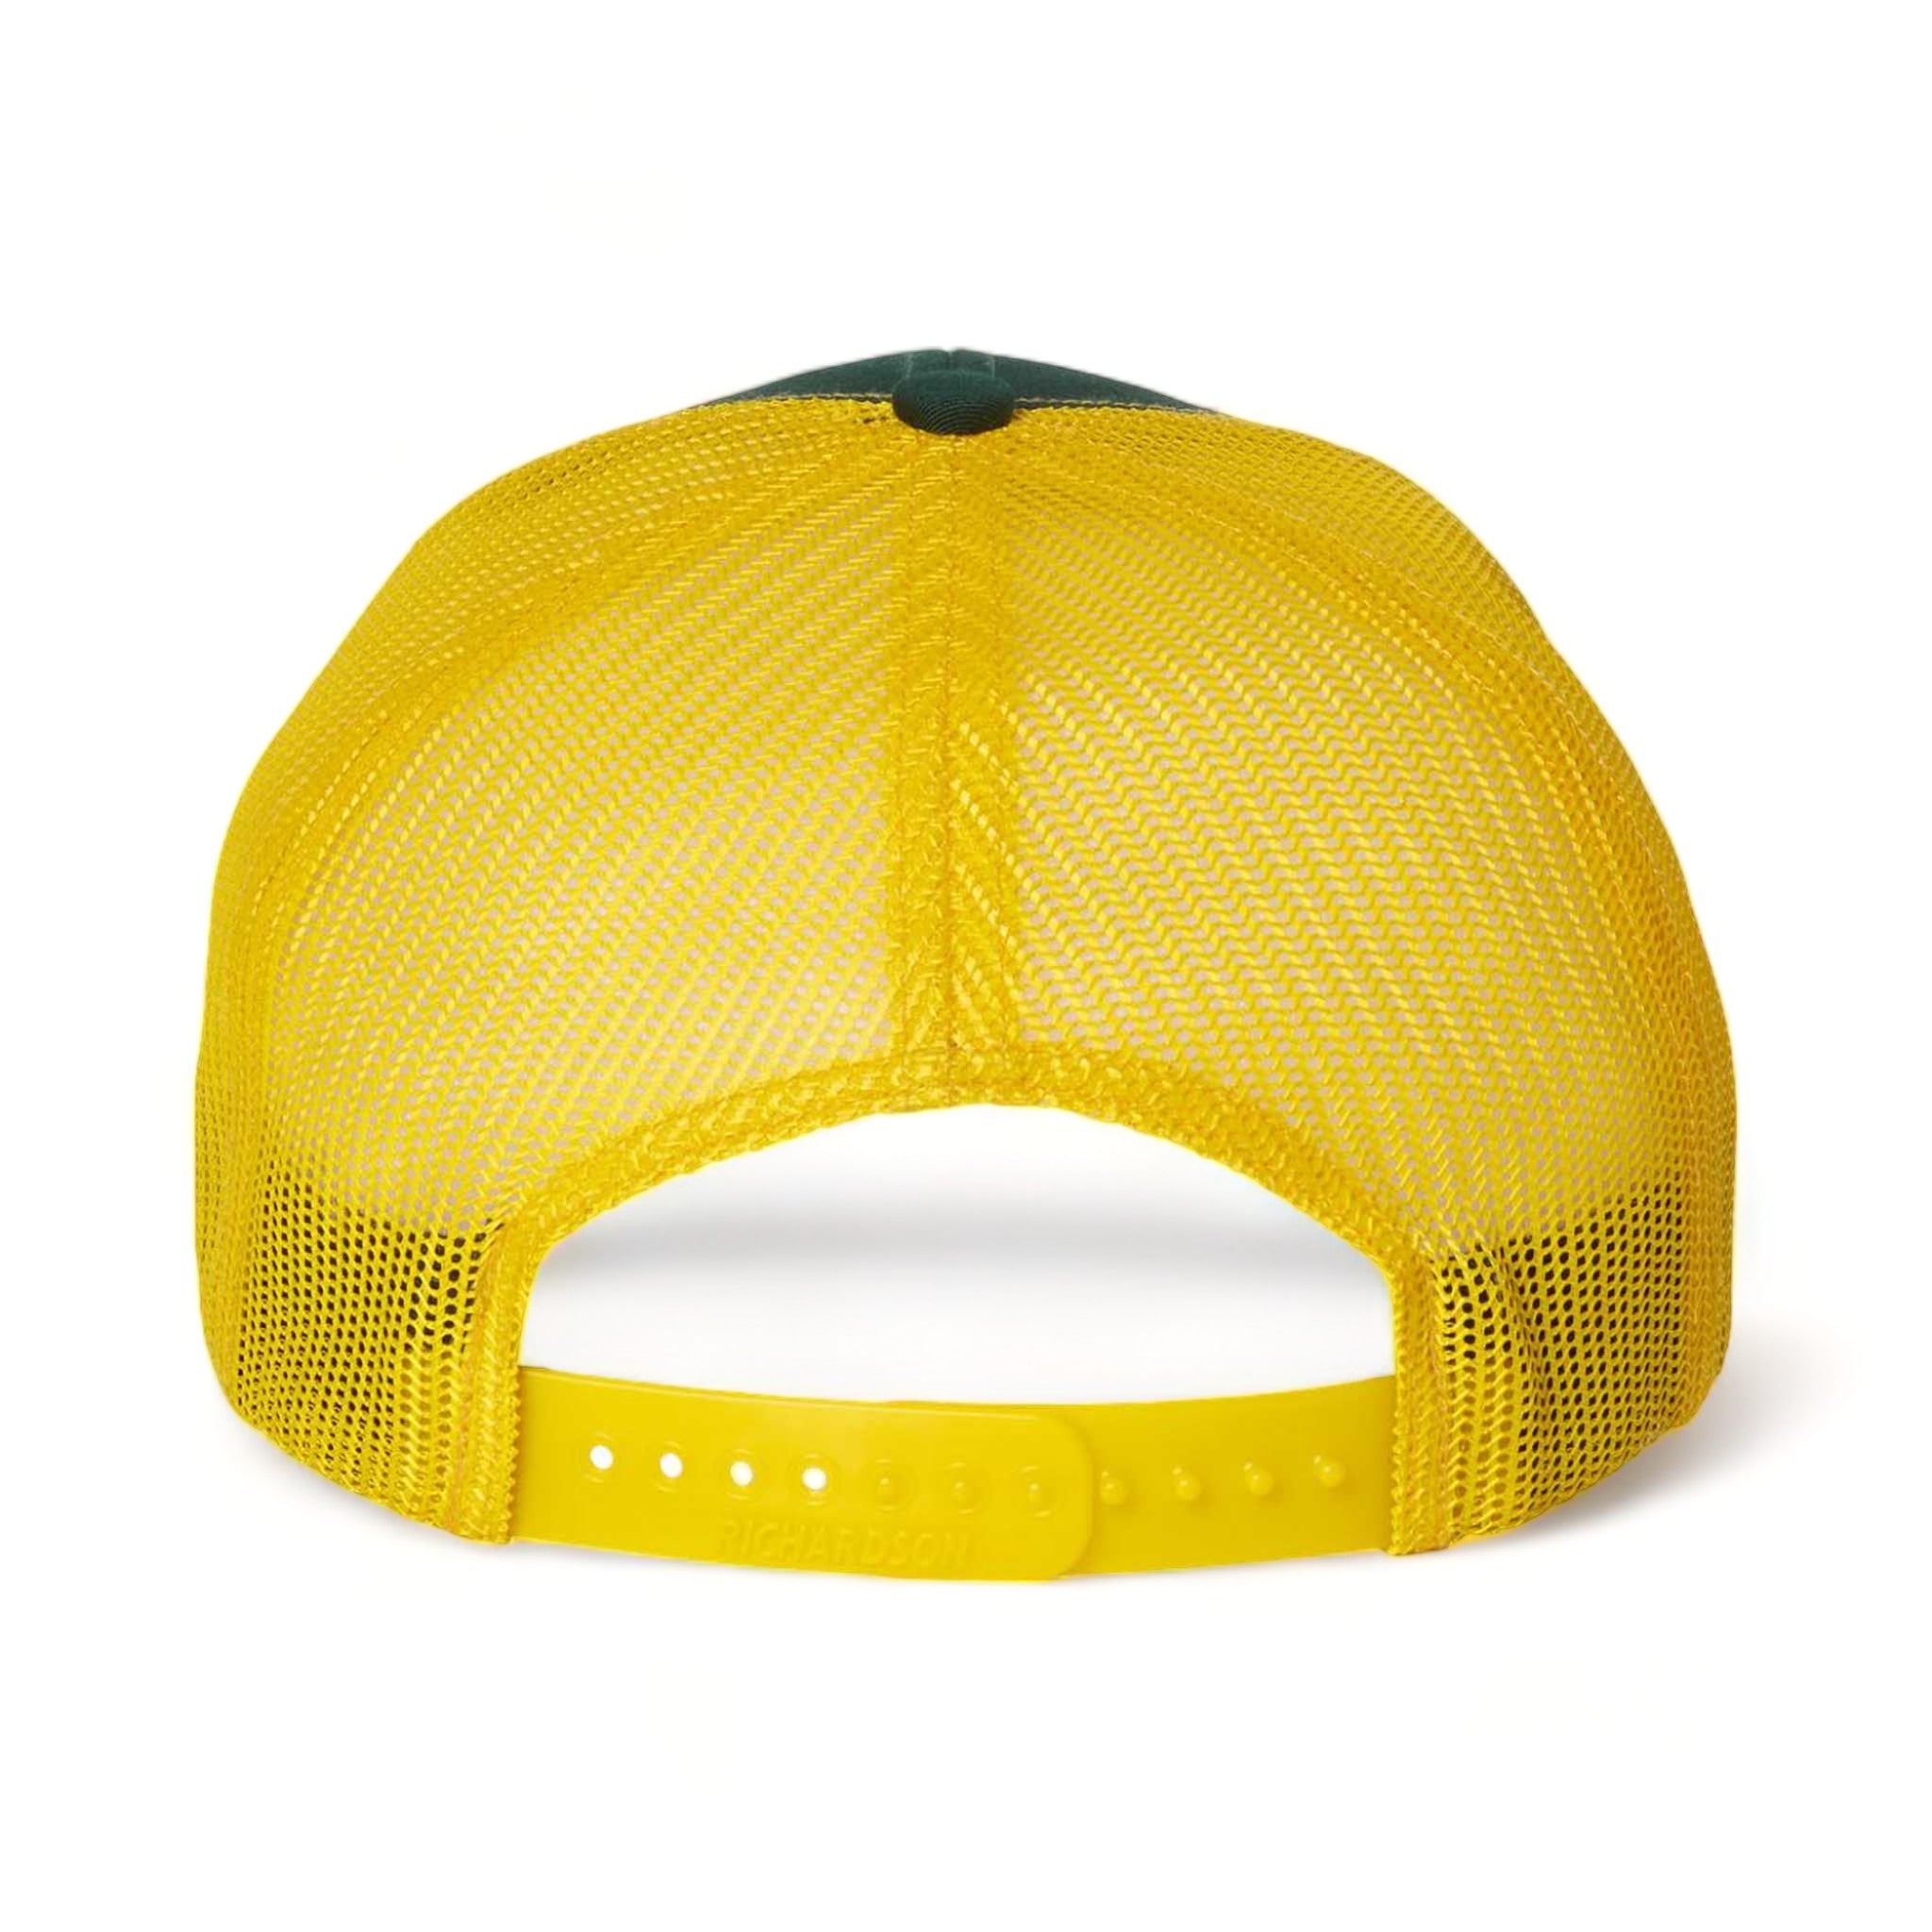 Back view of Richardson 112 custom hat in dark green and yellow